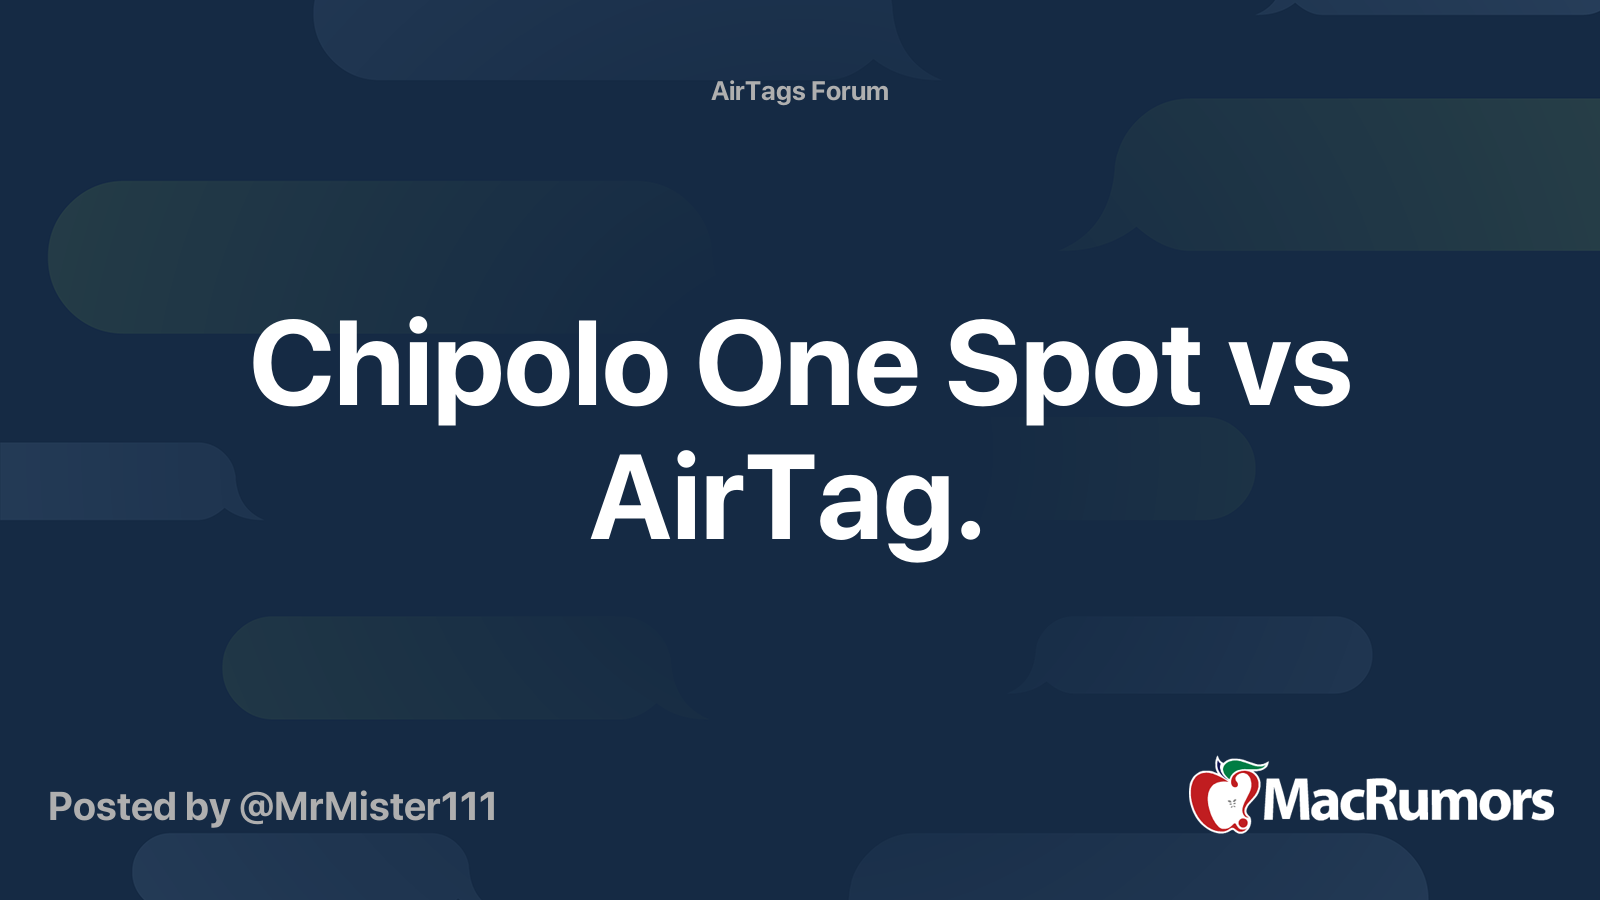 Chipolo ONE Spot review: the only real alternative to AirTag - General  Discussion Discussions on AppleInsider Forums